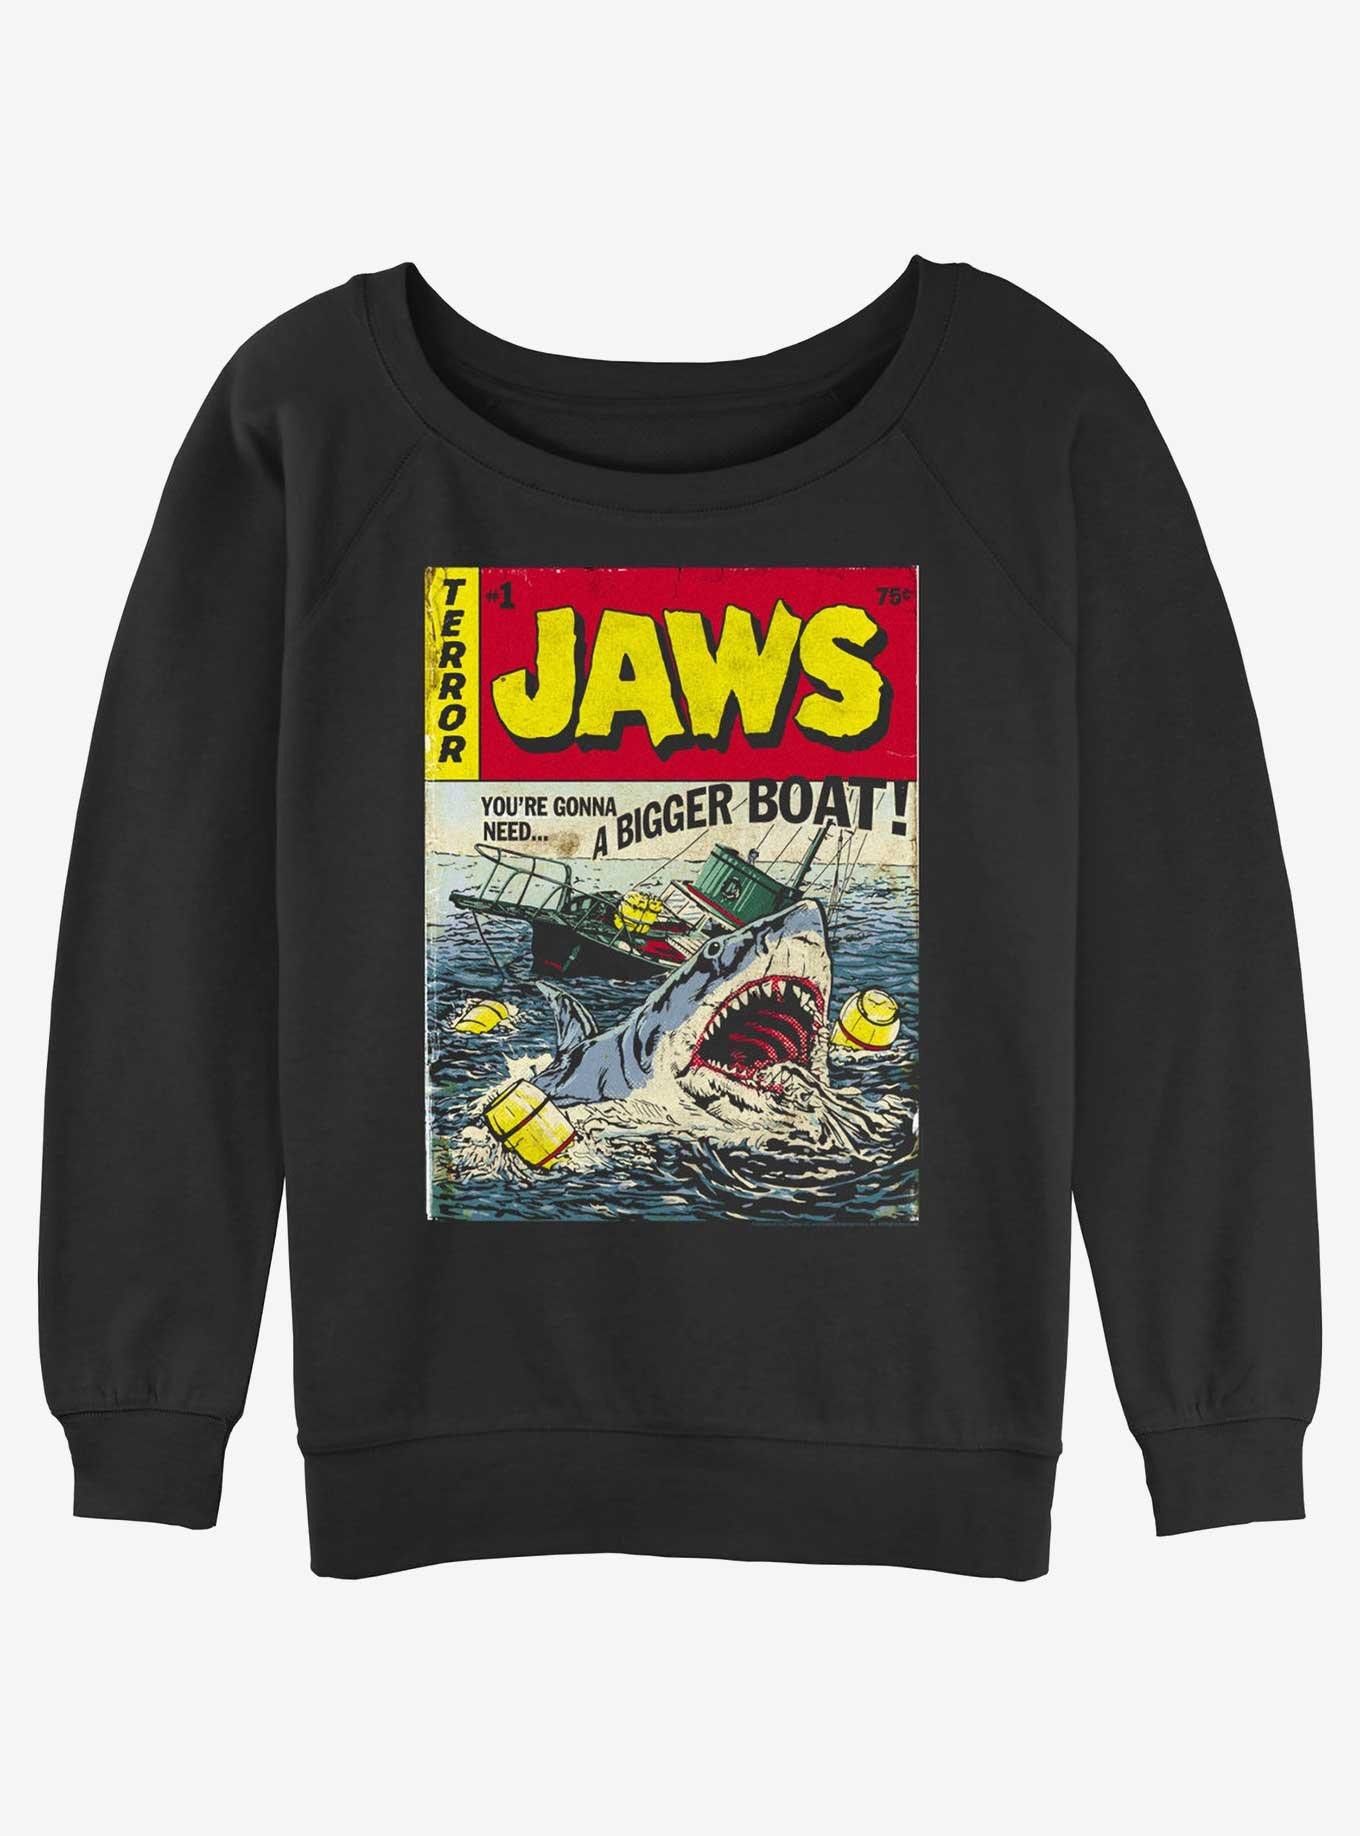 Jaws You're Gonna Need A Bigger Boat Tank Top Vest - My Icon Clothing